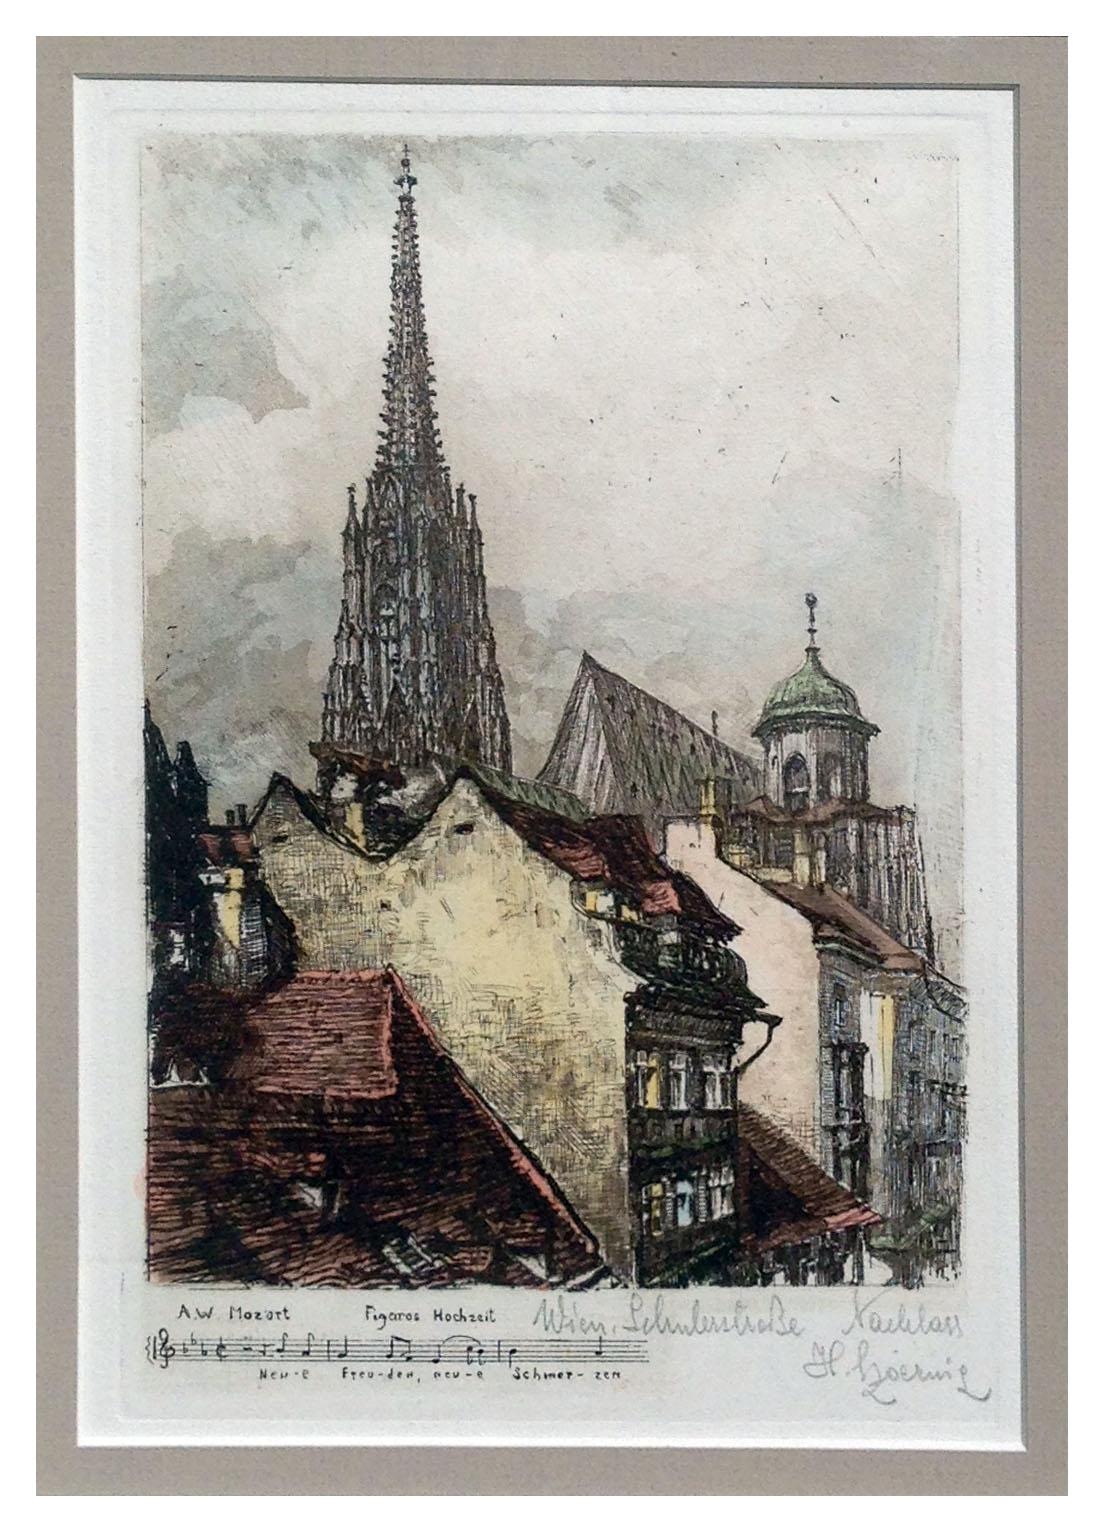 Mozart’s Residence with Symphony St. Stephans Cathedral - Vienna, Austria  - Print by HENRY GOERING